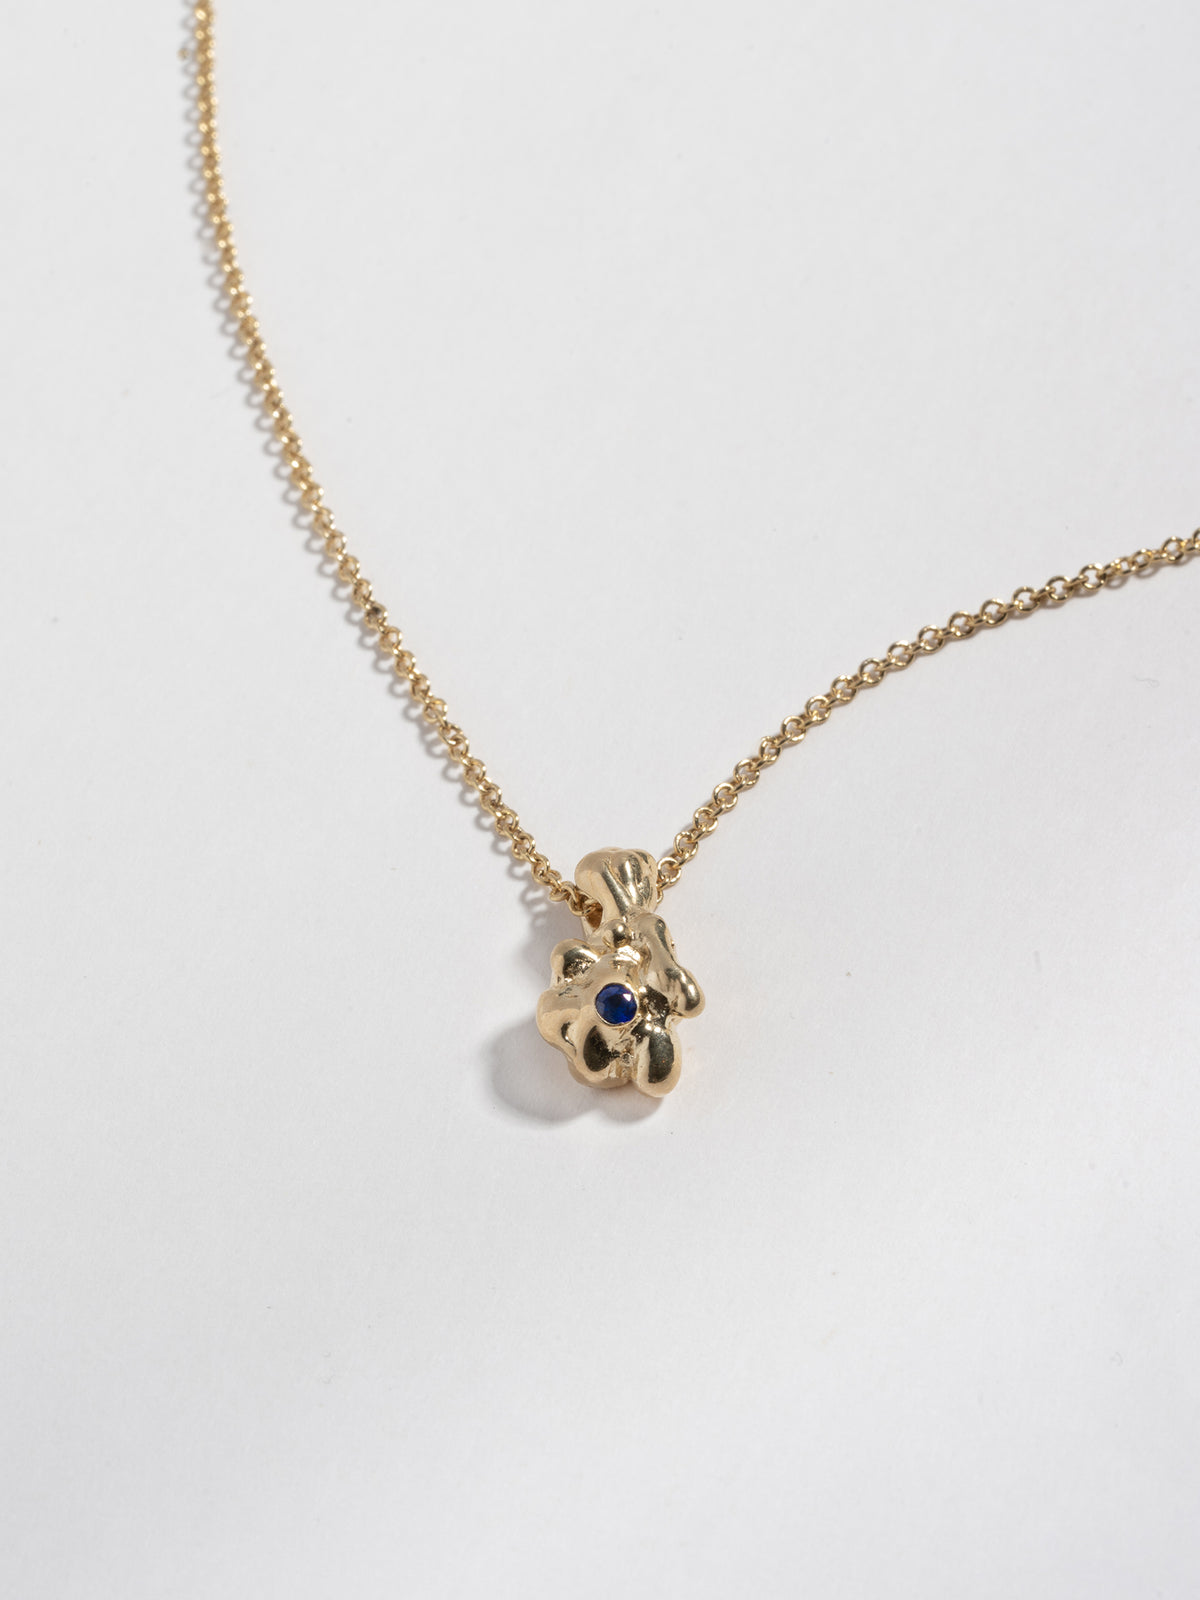 Close up of 14k gold plated GOBBO Necklace pendant with blue sapphire